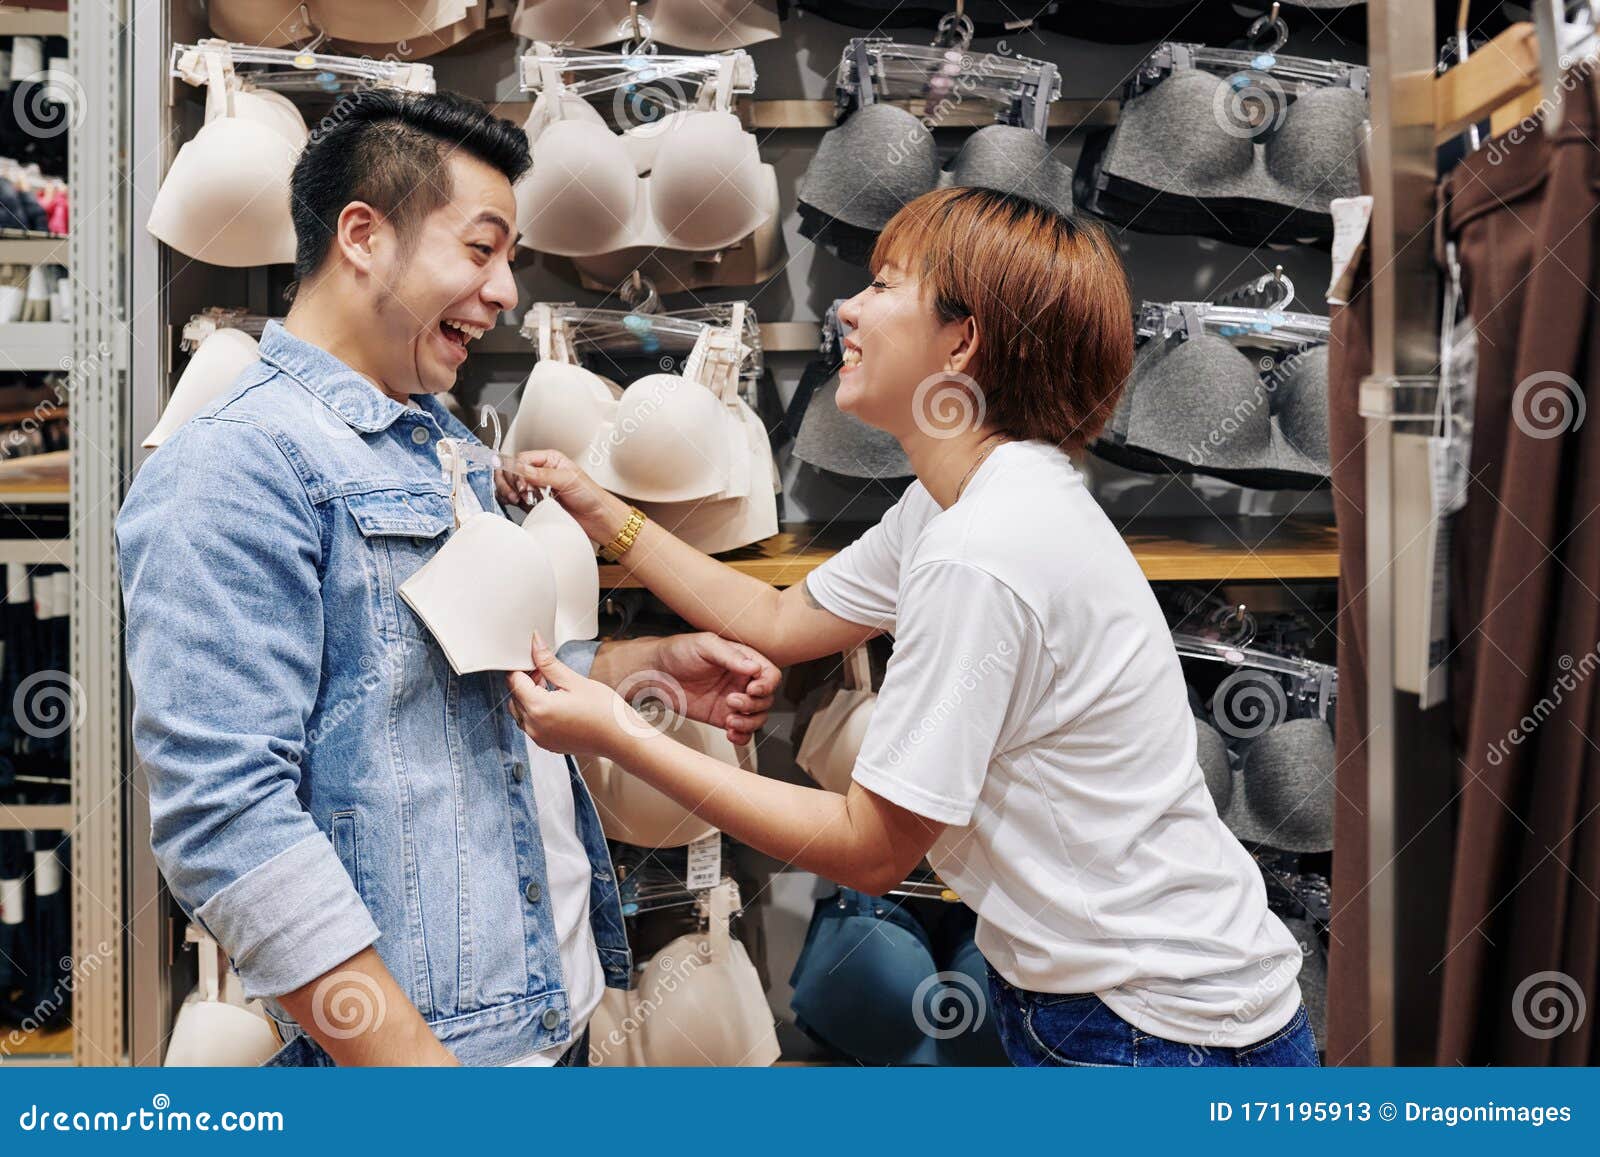 Funny Couple in Underwear Store Stock Image - Image of choosing